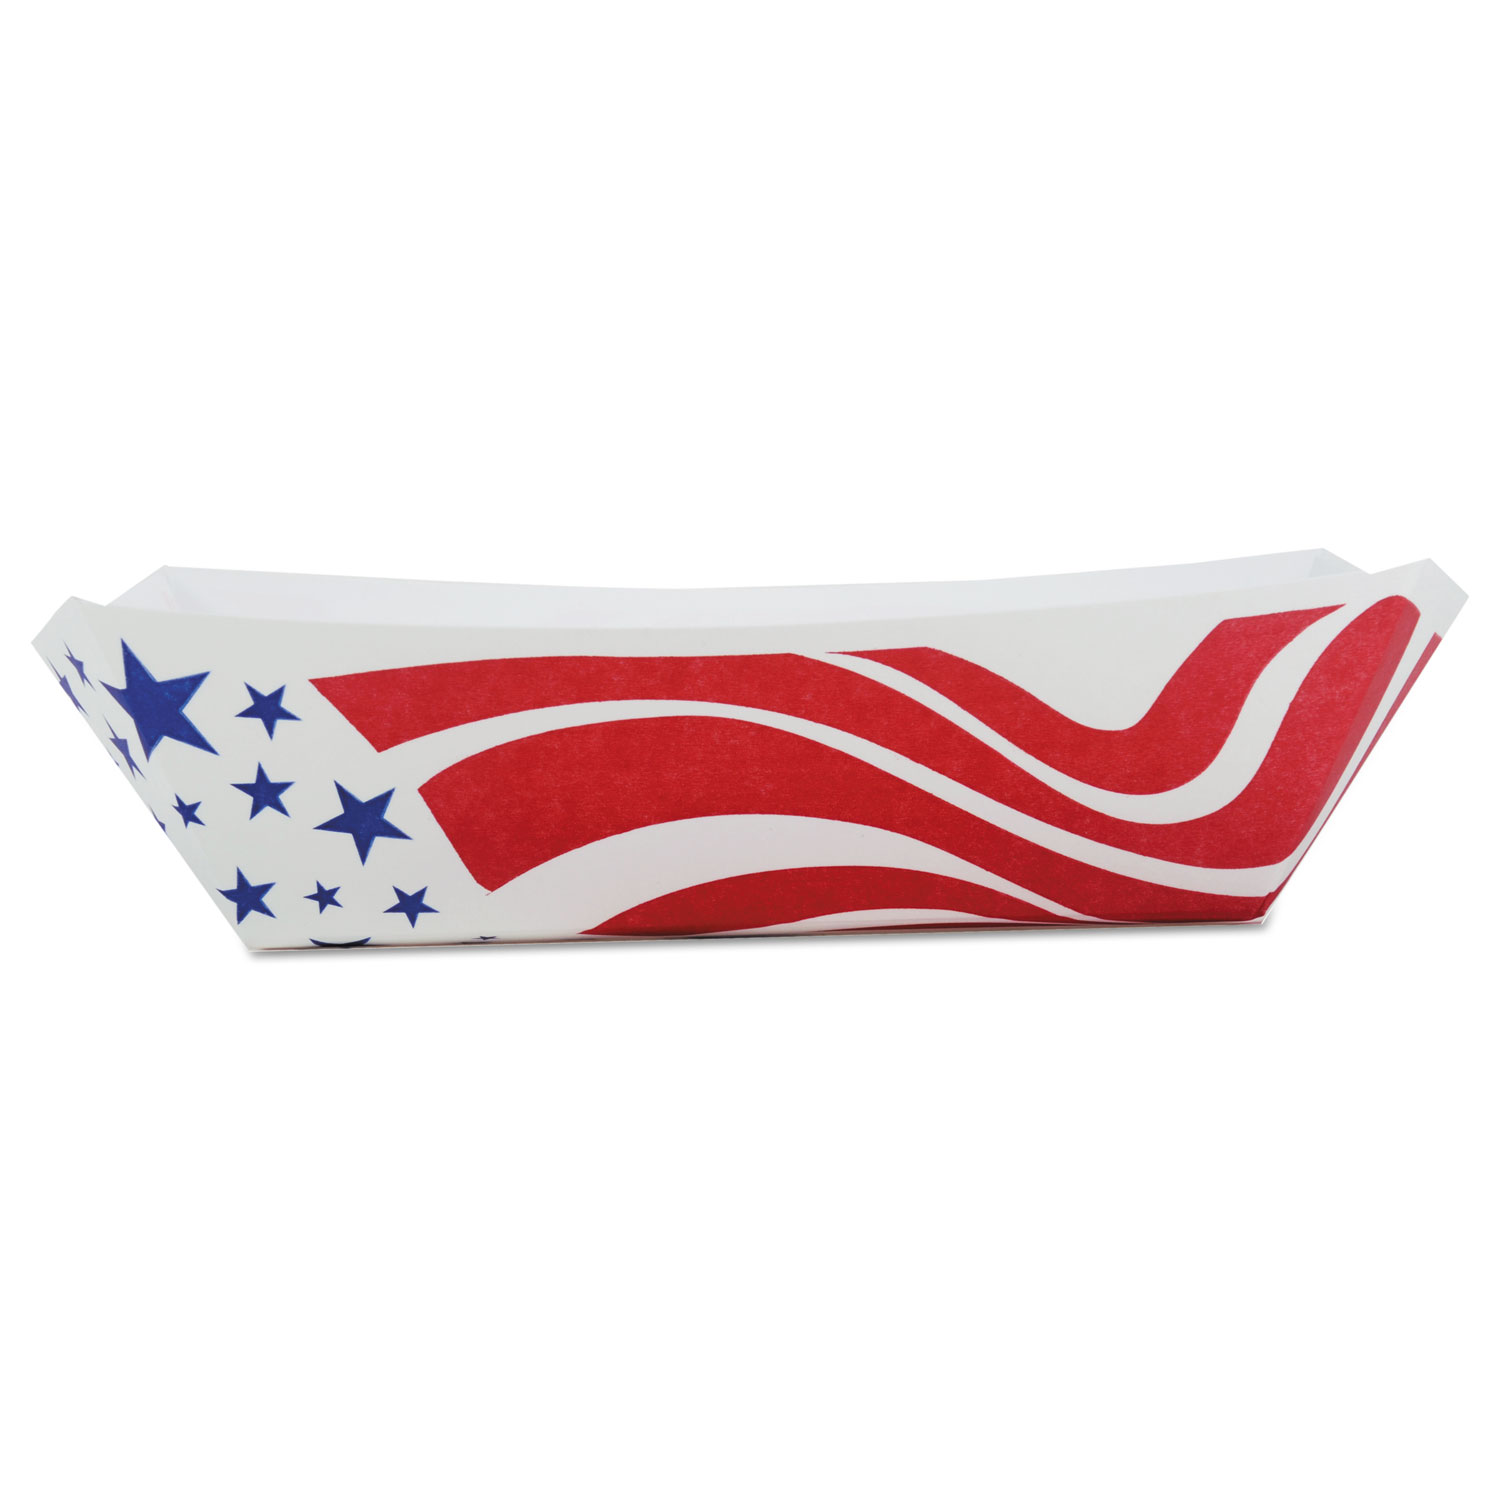  SCT 0533 American Flag Paper Food Baskets, Red/White/Blue, 1 lb Capacity, 1000/Carton (SCH0533) 